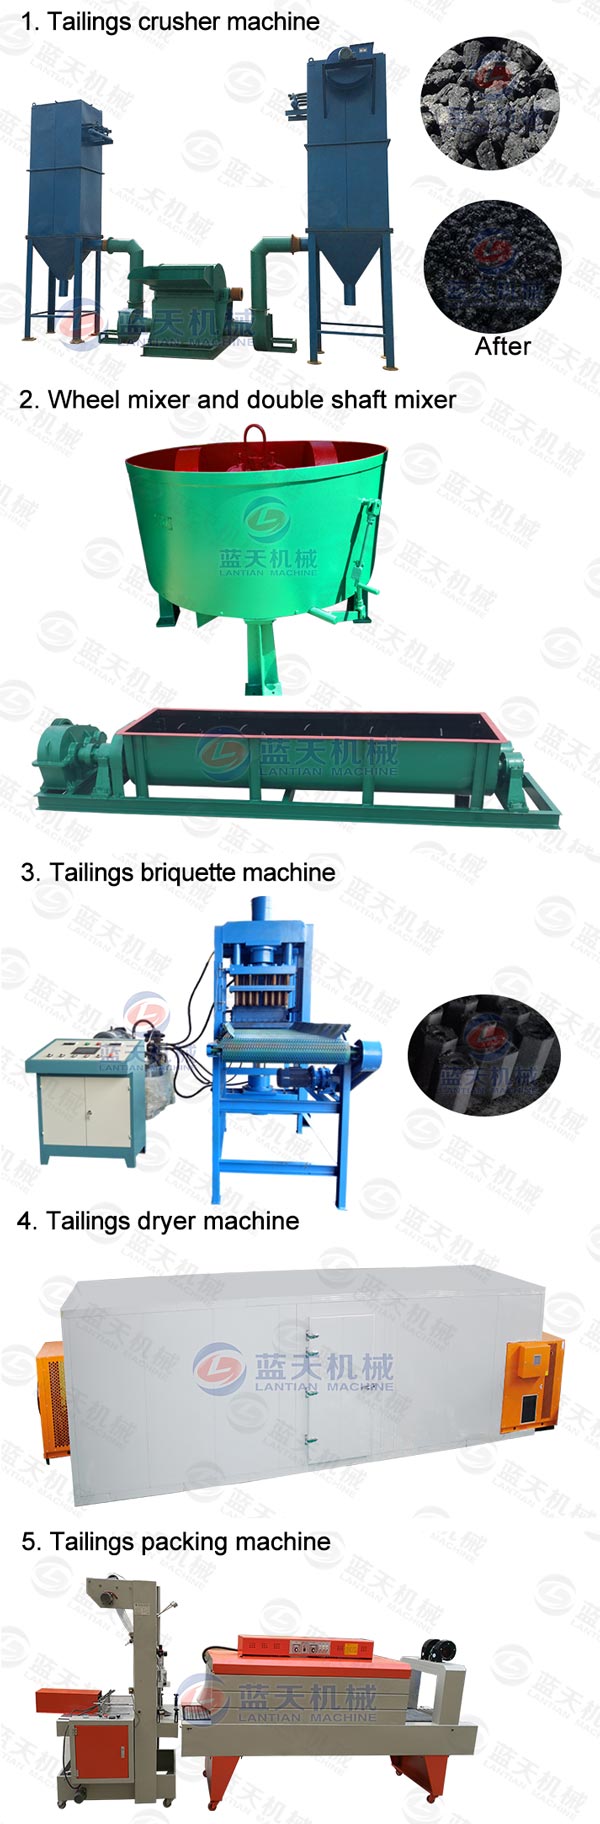 Product line of tailings briquetting machine